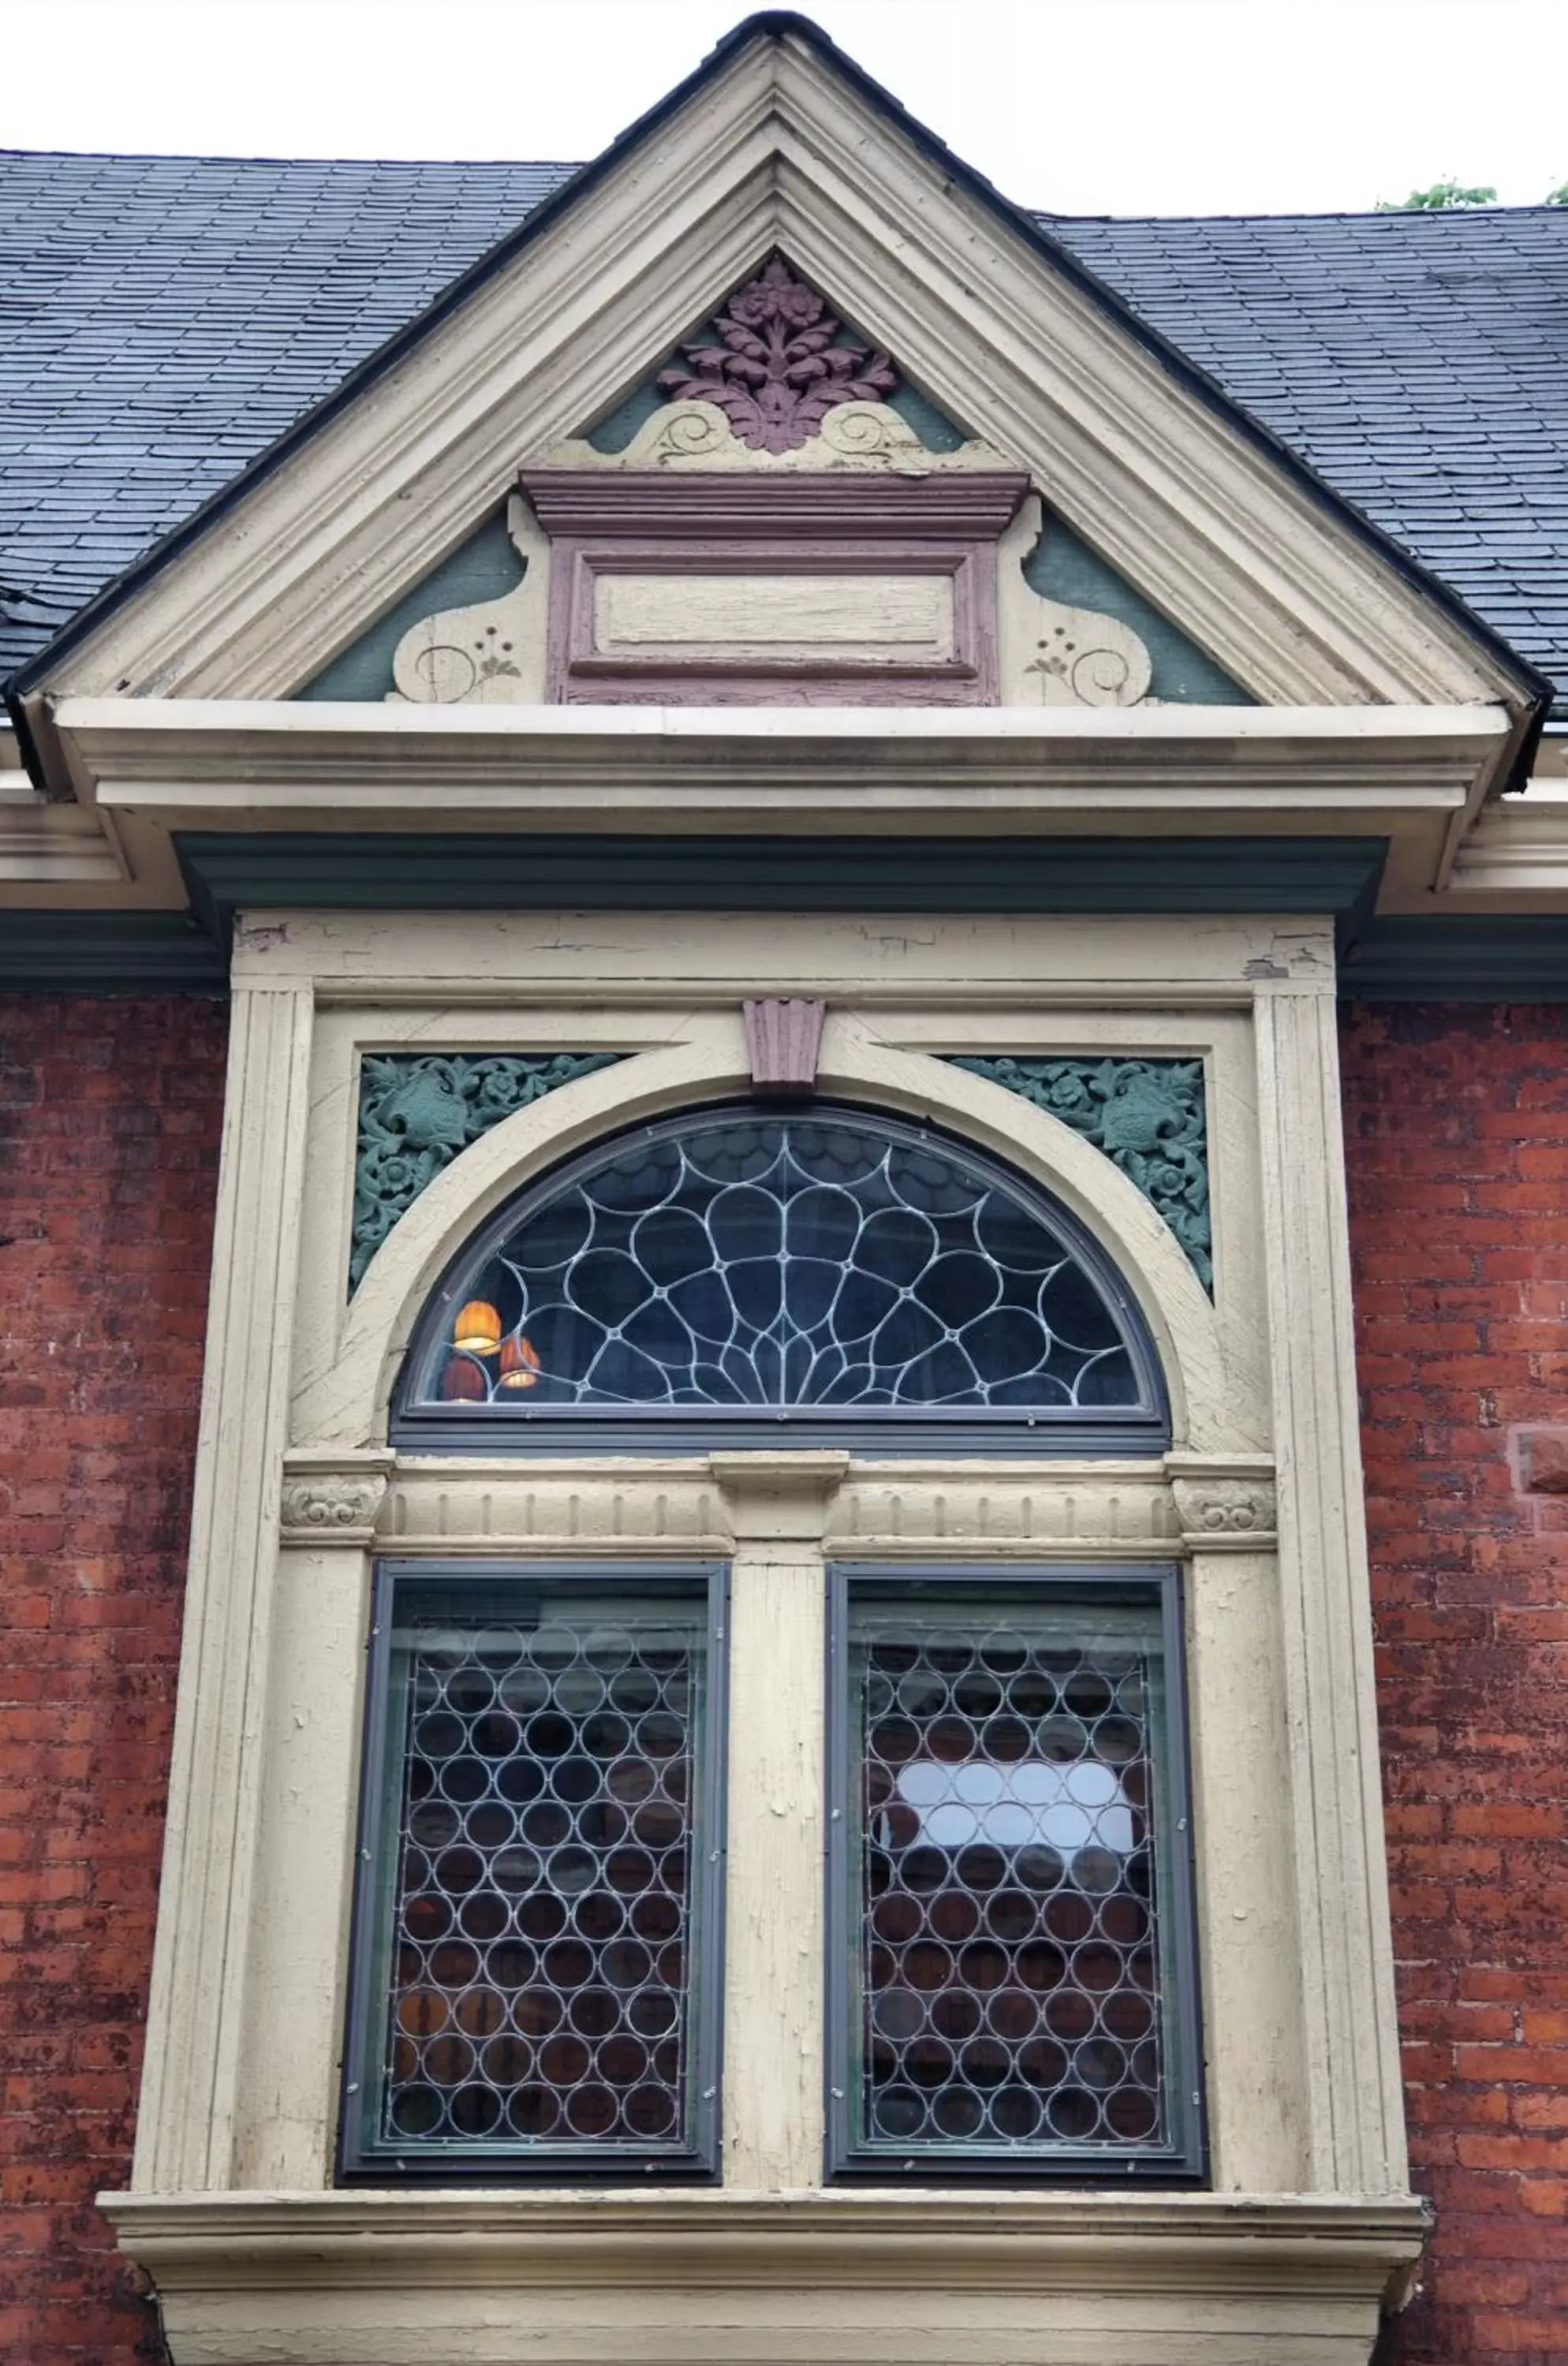 Decorative detail, Facade/Entrance in The Inn on Ferry Street